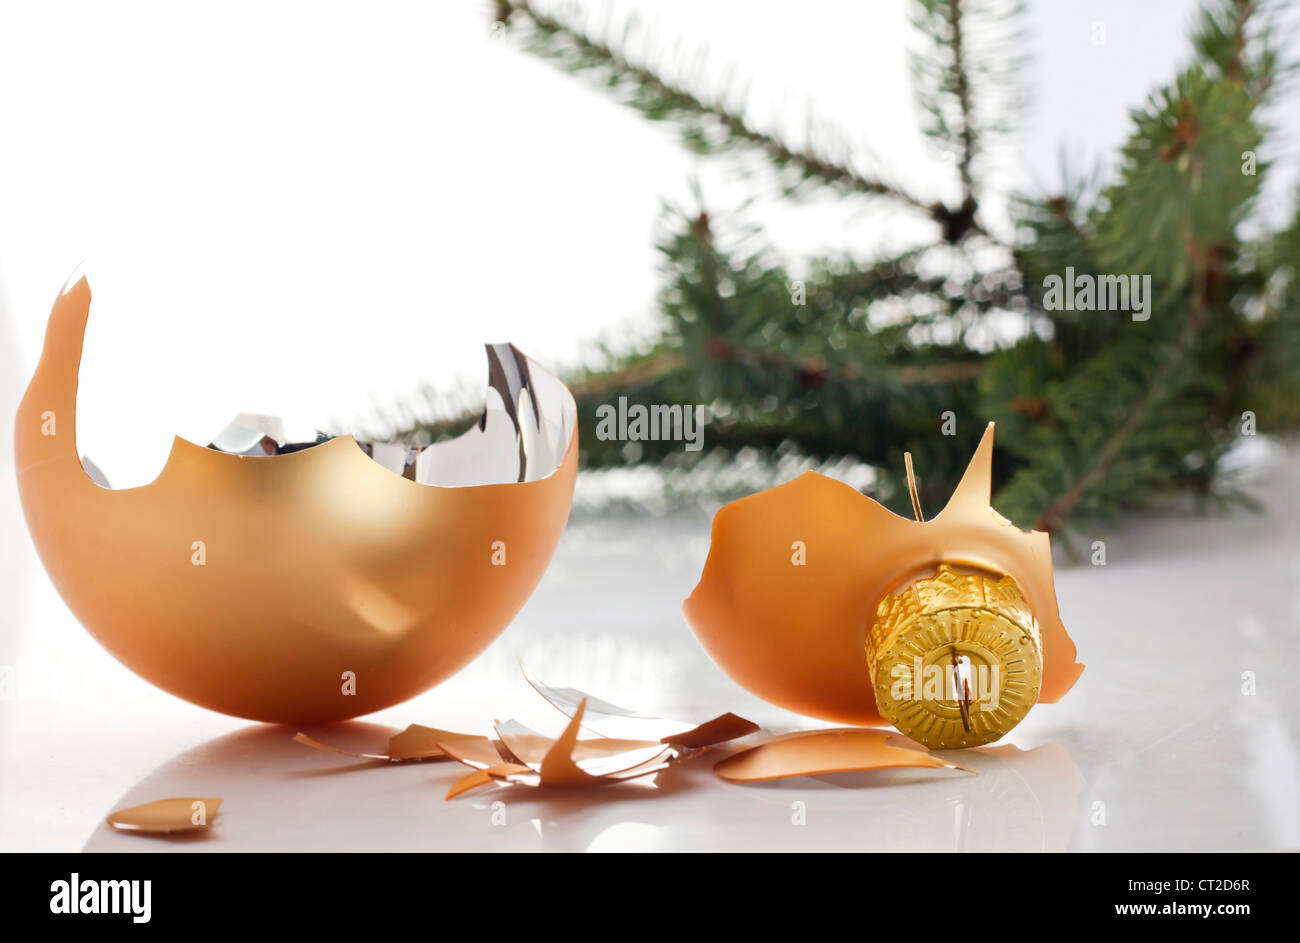 Concept of the end of Christmas with broken bauble Stock Photo